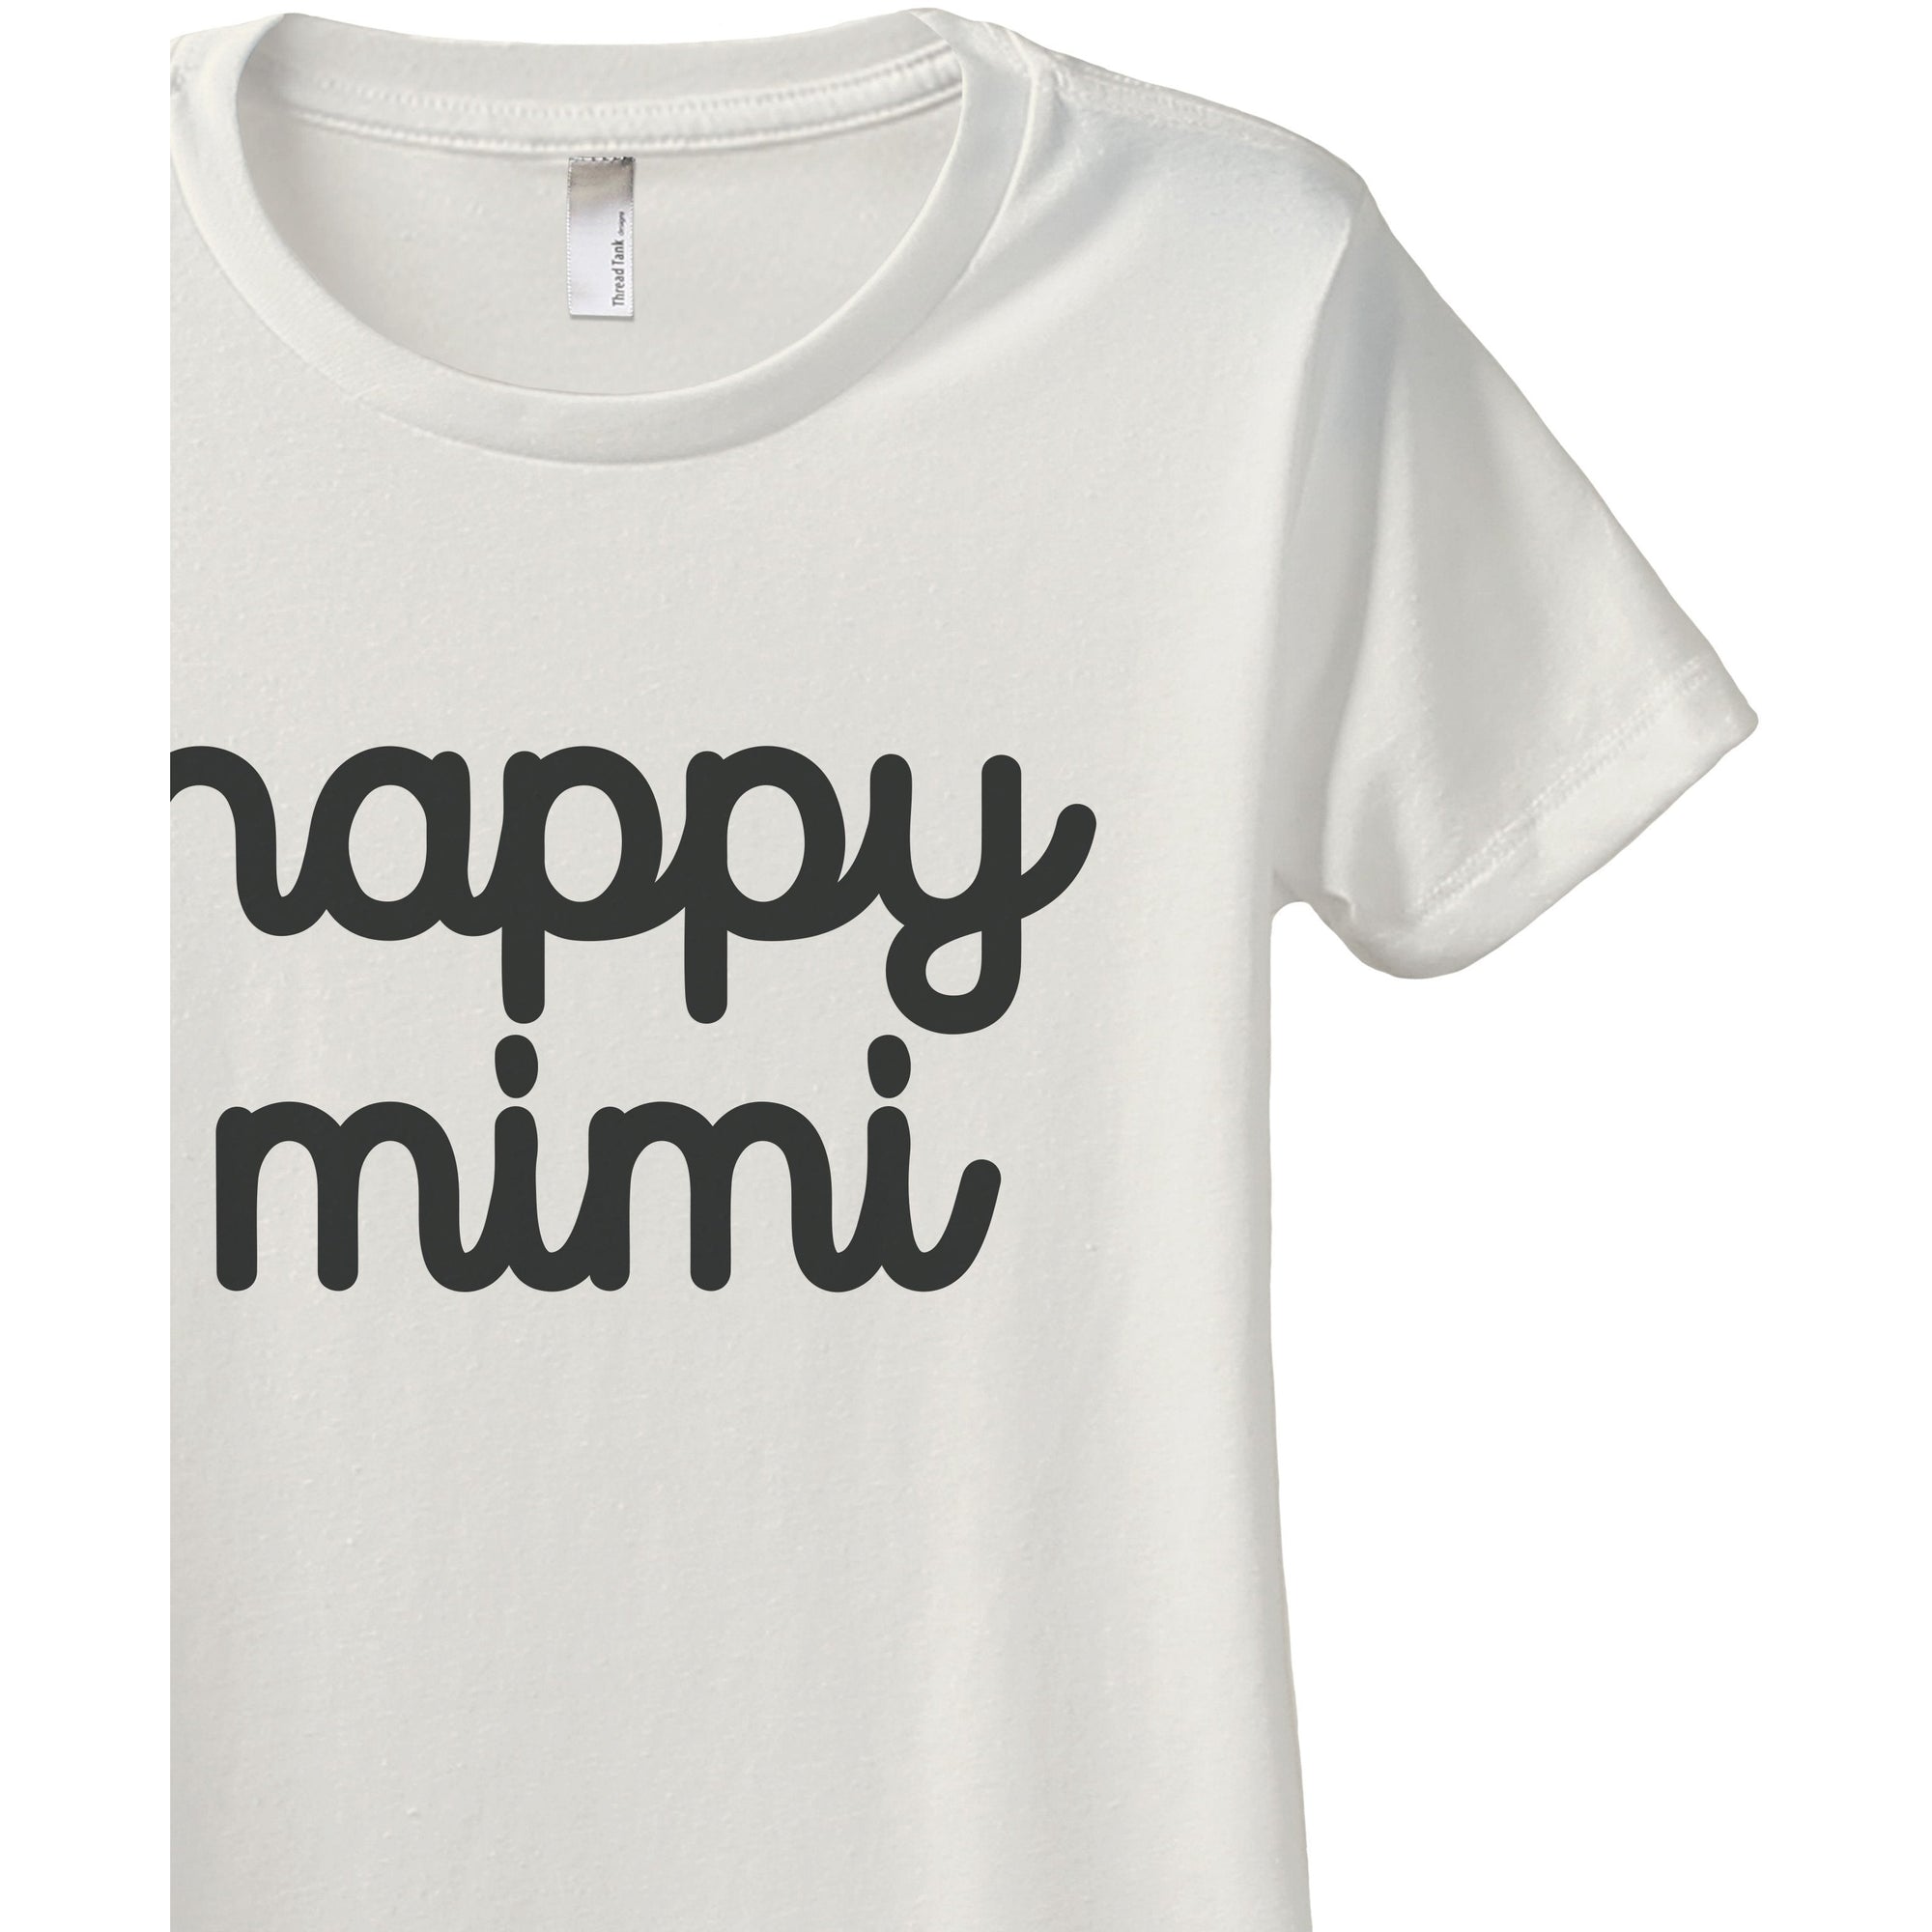 Happy Mimi Women's Relaxed Crewneck T-Shirt Top Tee Charcoal Grey
